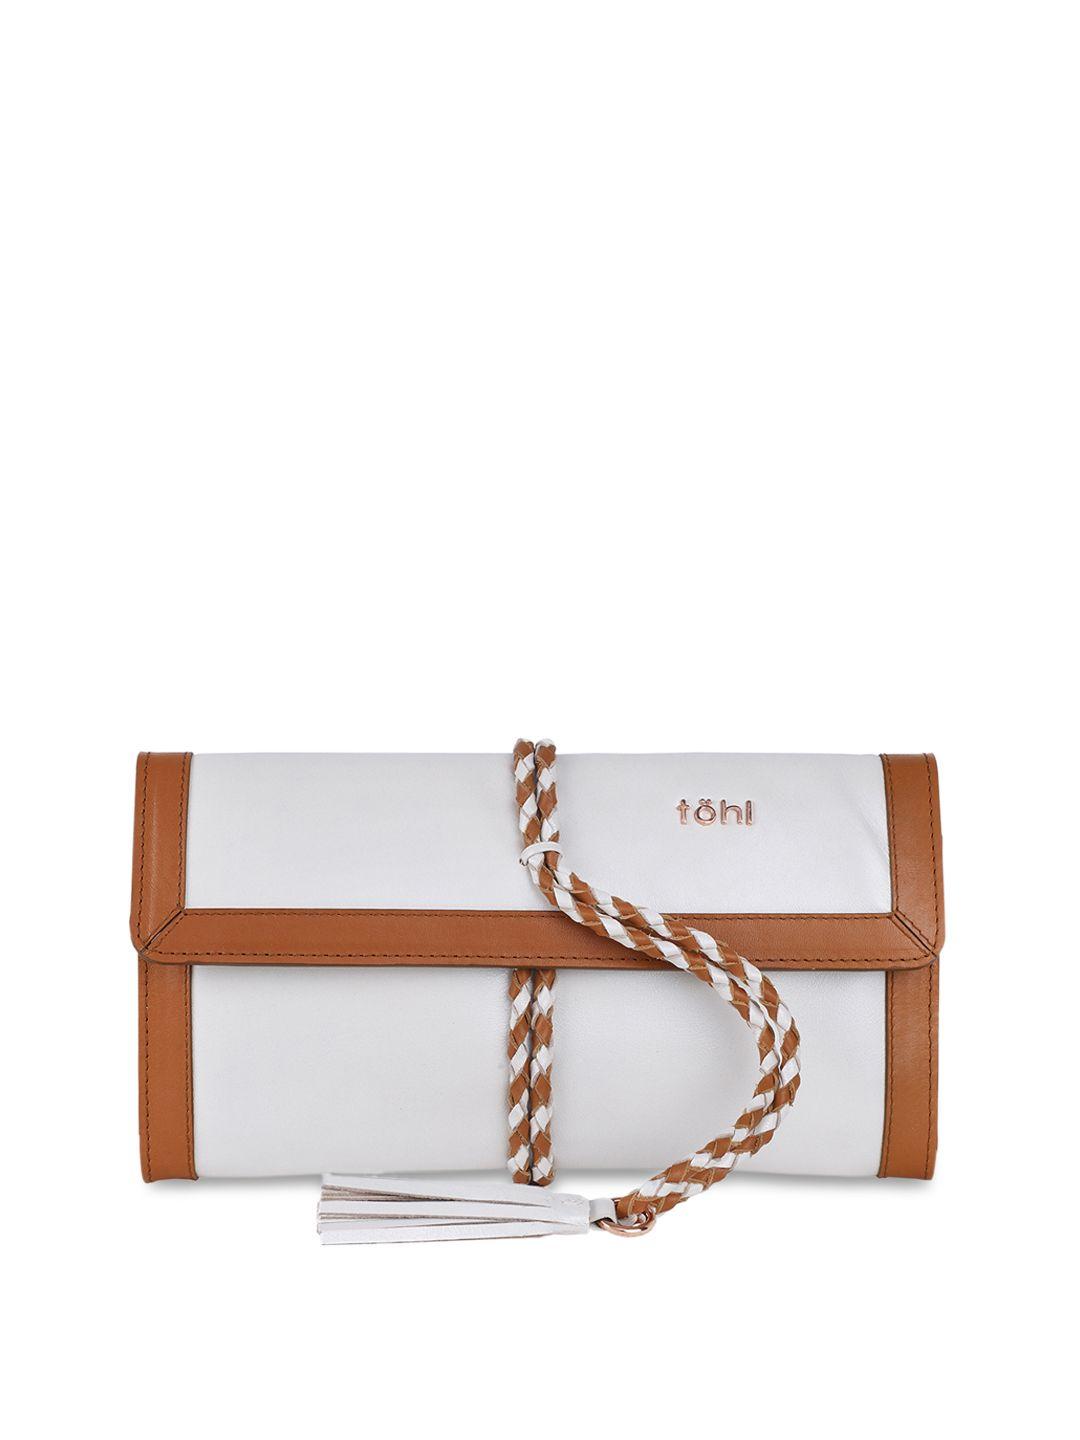 tohl white & brown solid clutch